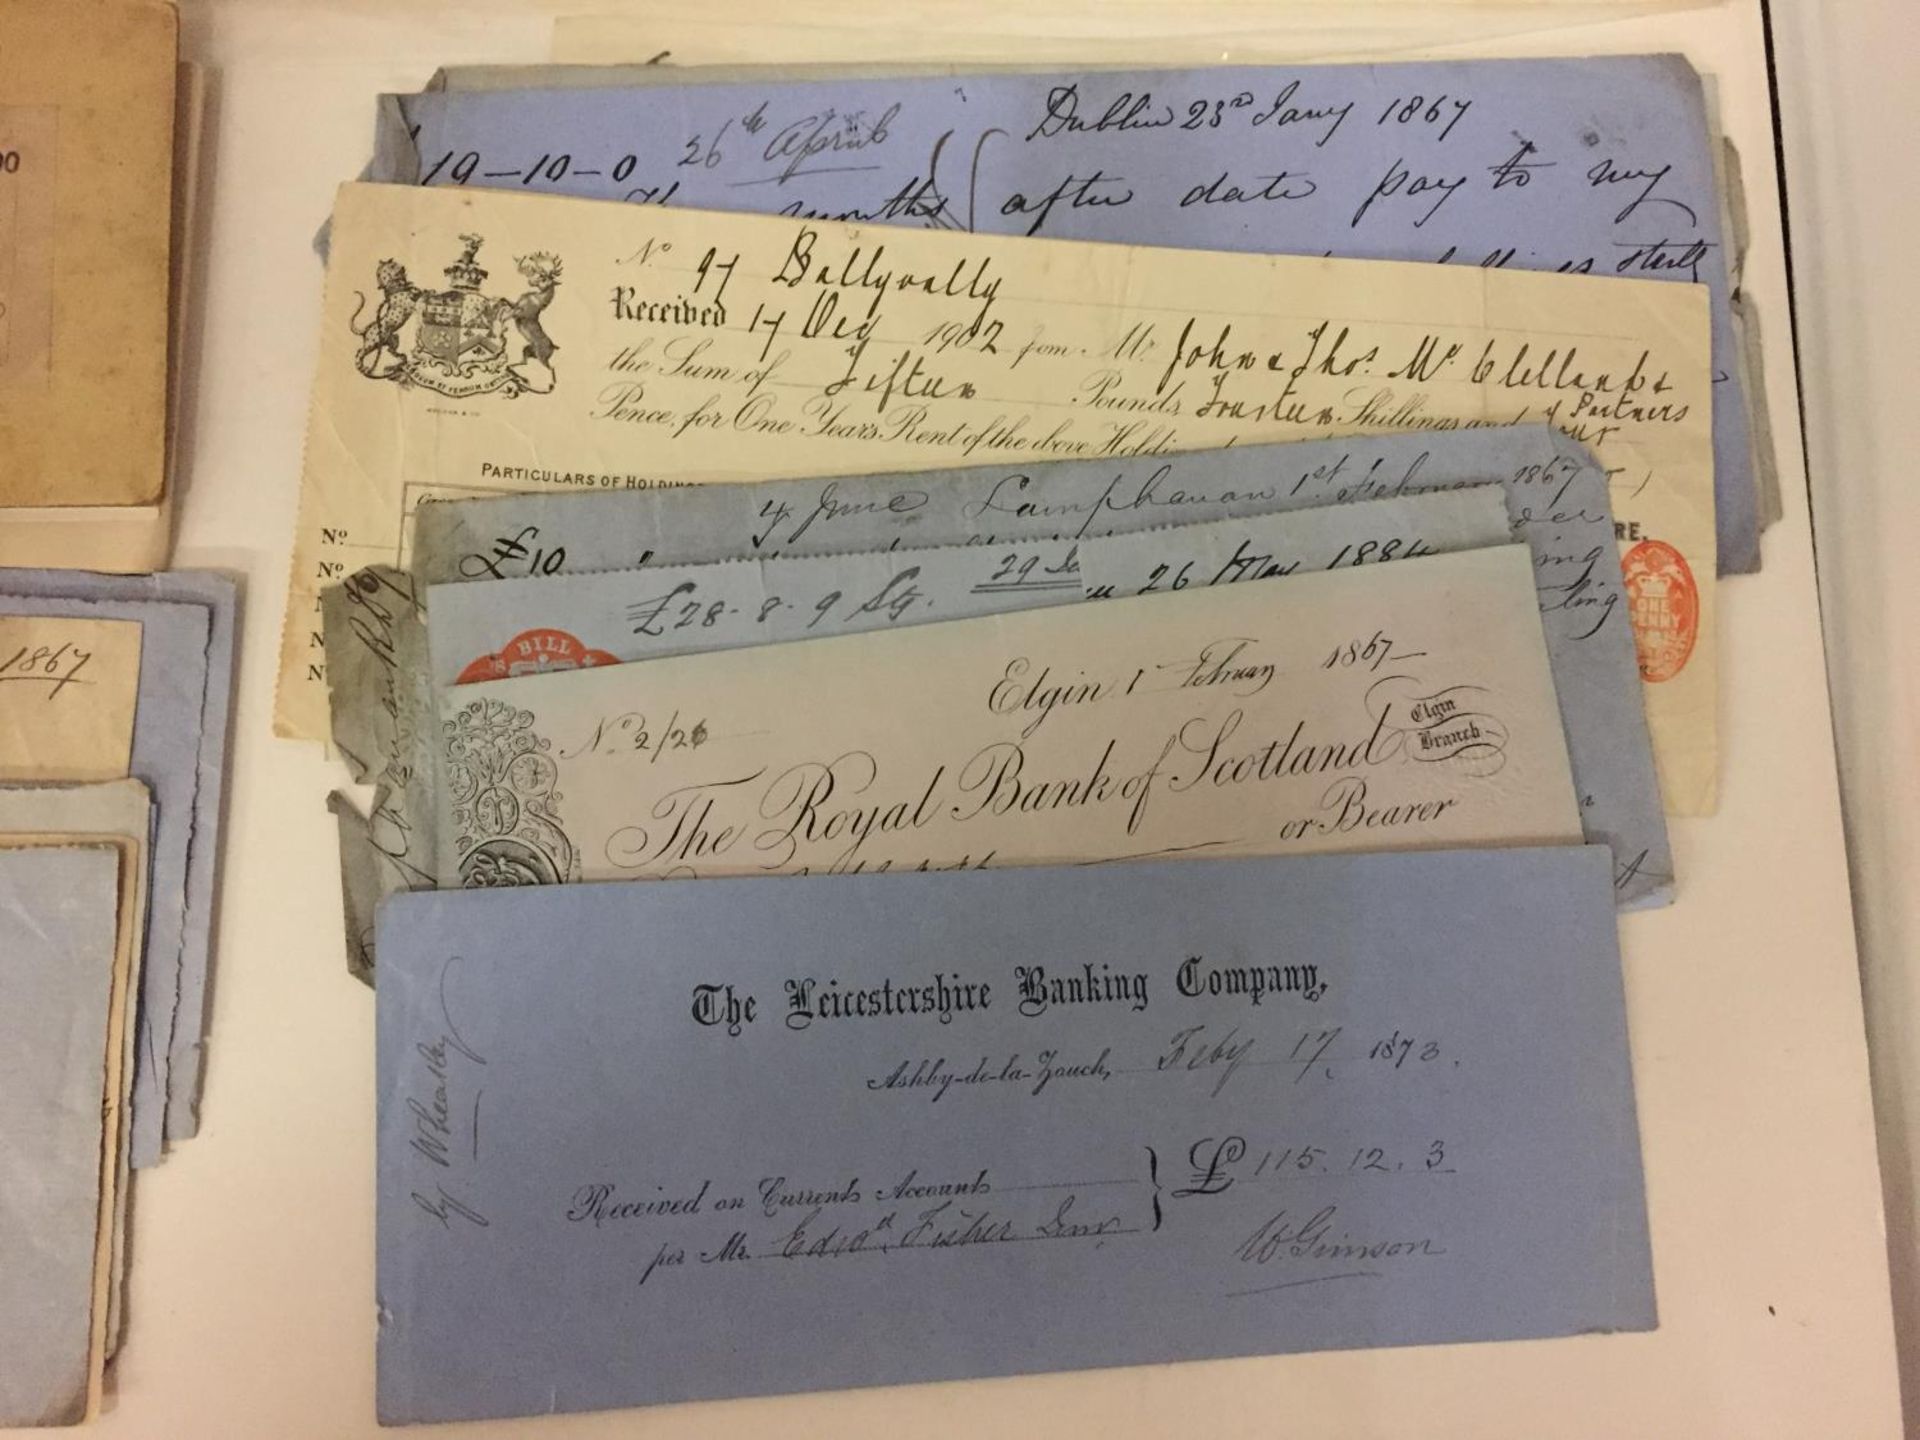 A QUANTITY OF BANKERS DRAUGHTS, CHEQUE STUBS 1860'S - 1910 AND TWO SHARE CERIFICATES NEW YORK 1969 - Image 9 of 12